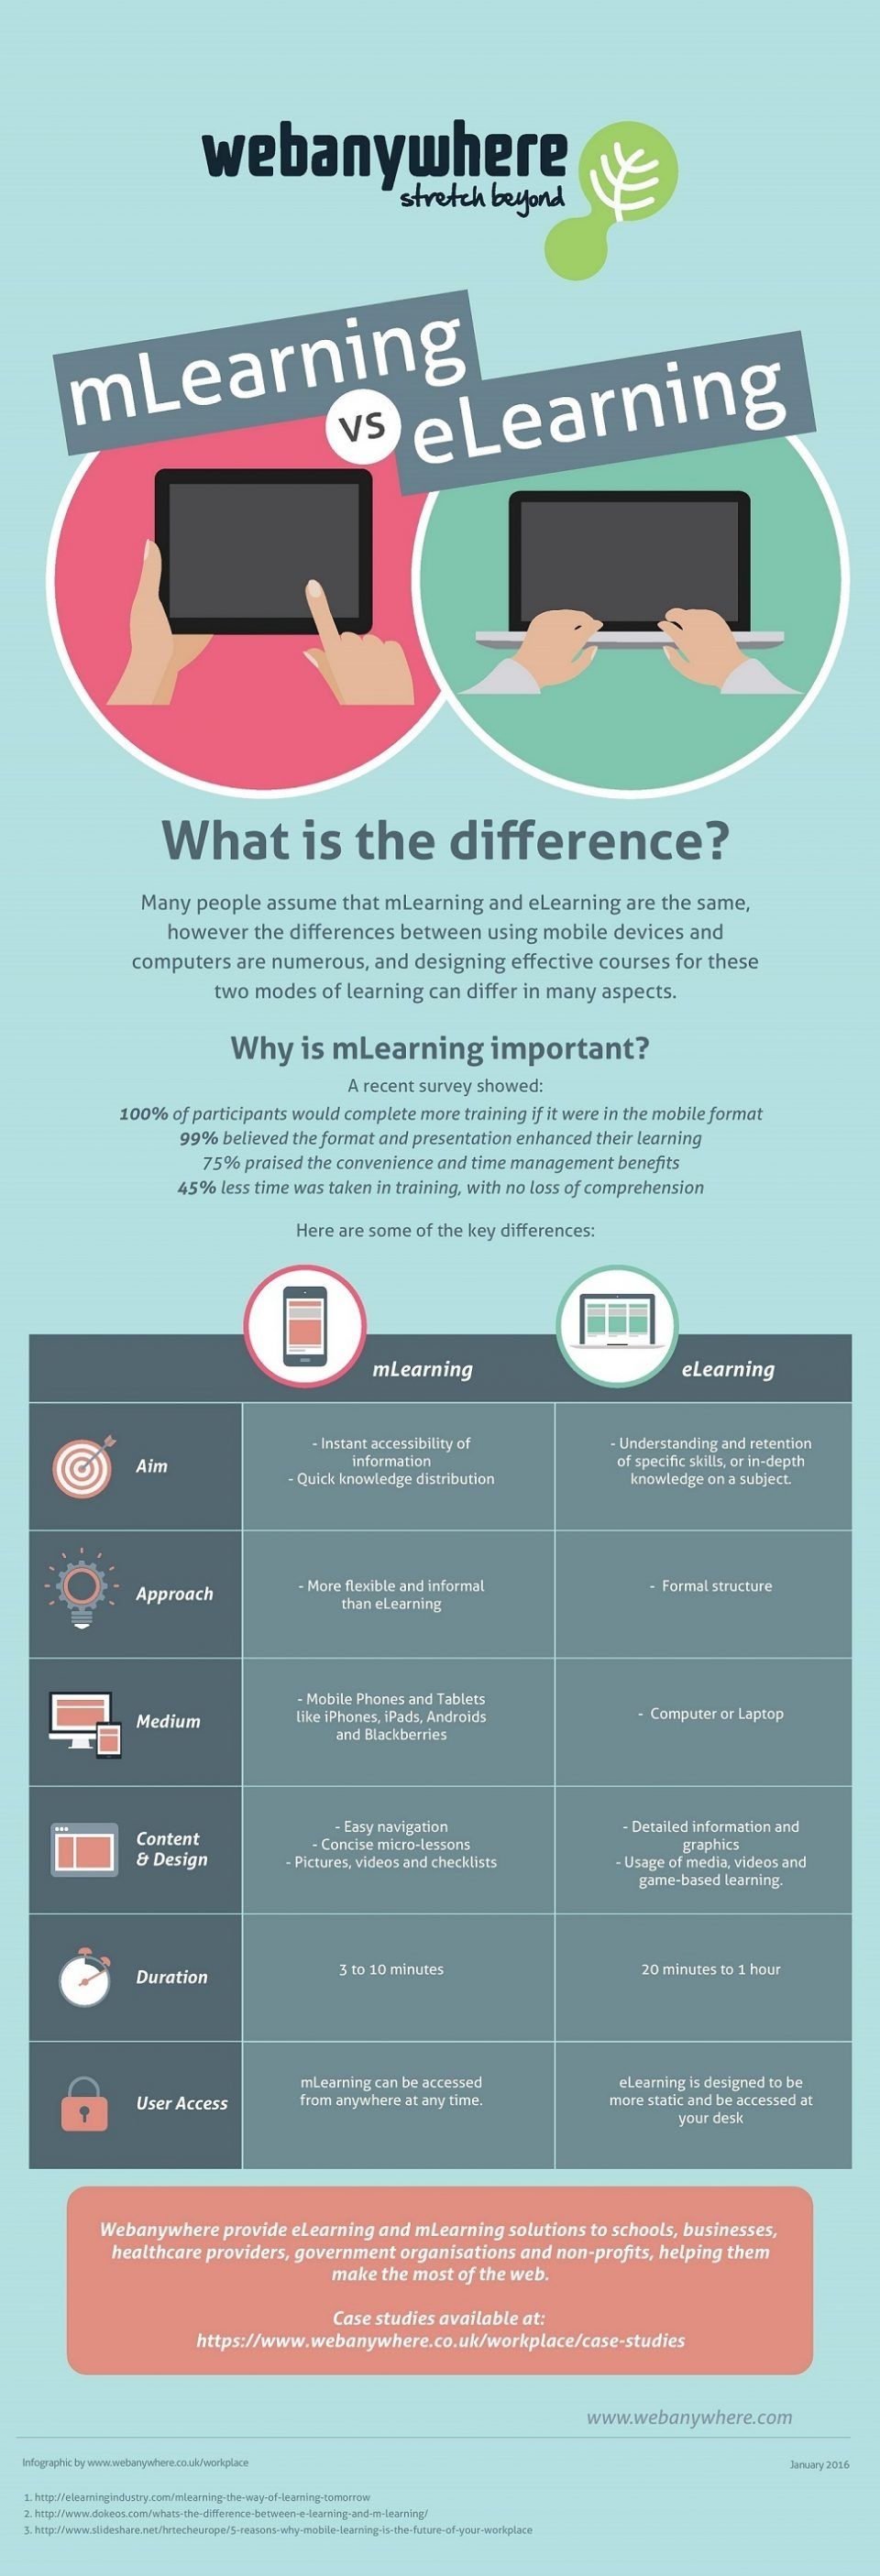 mLearning vs eLearning Infographic